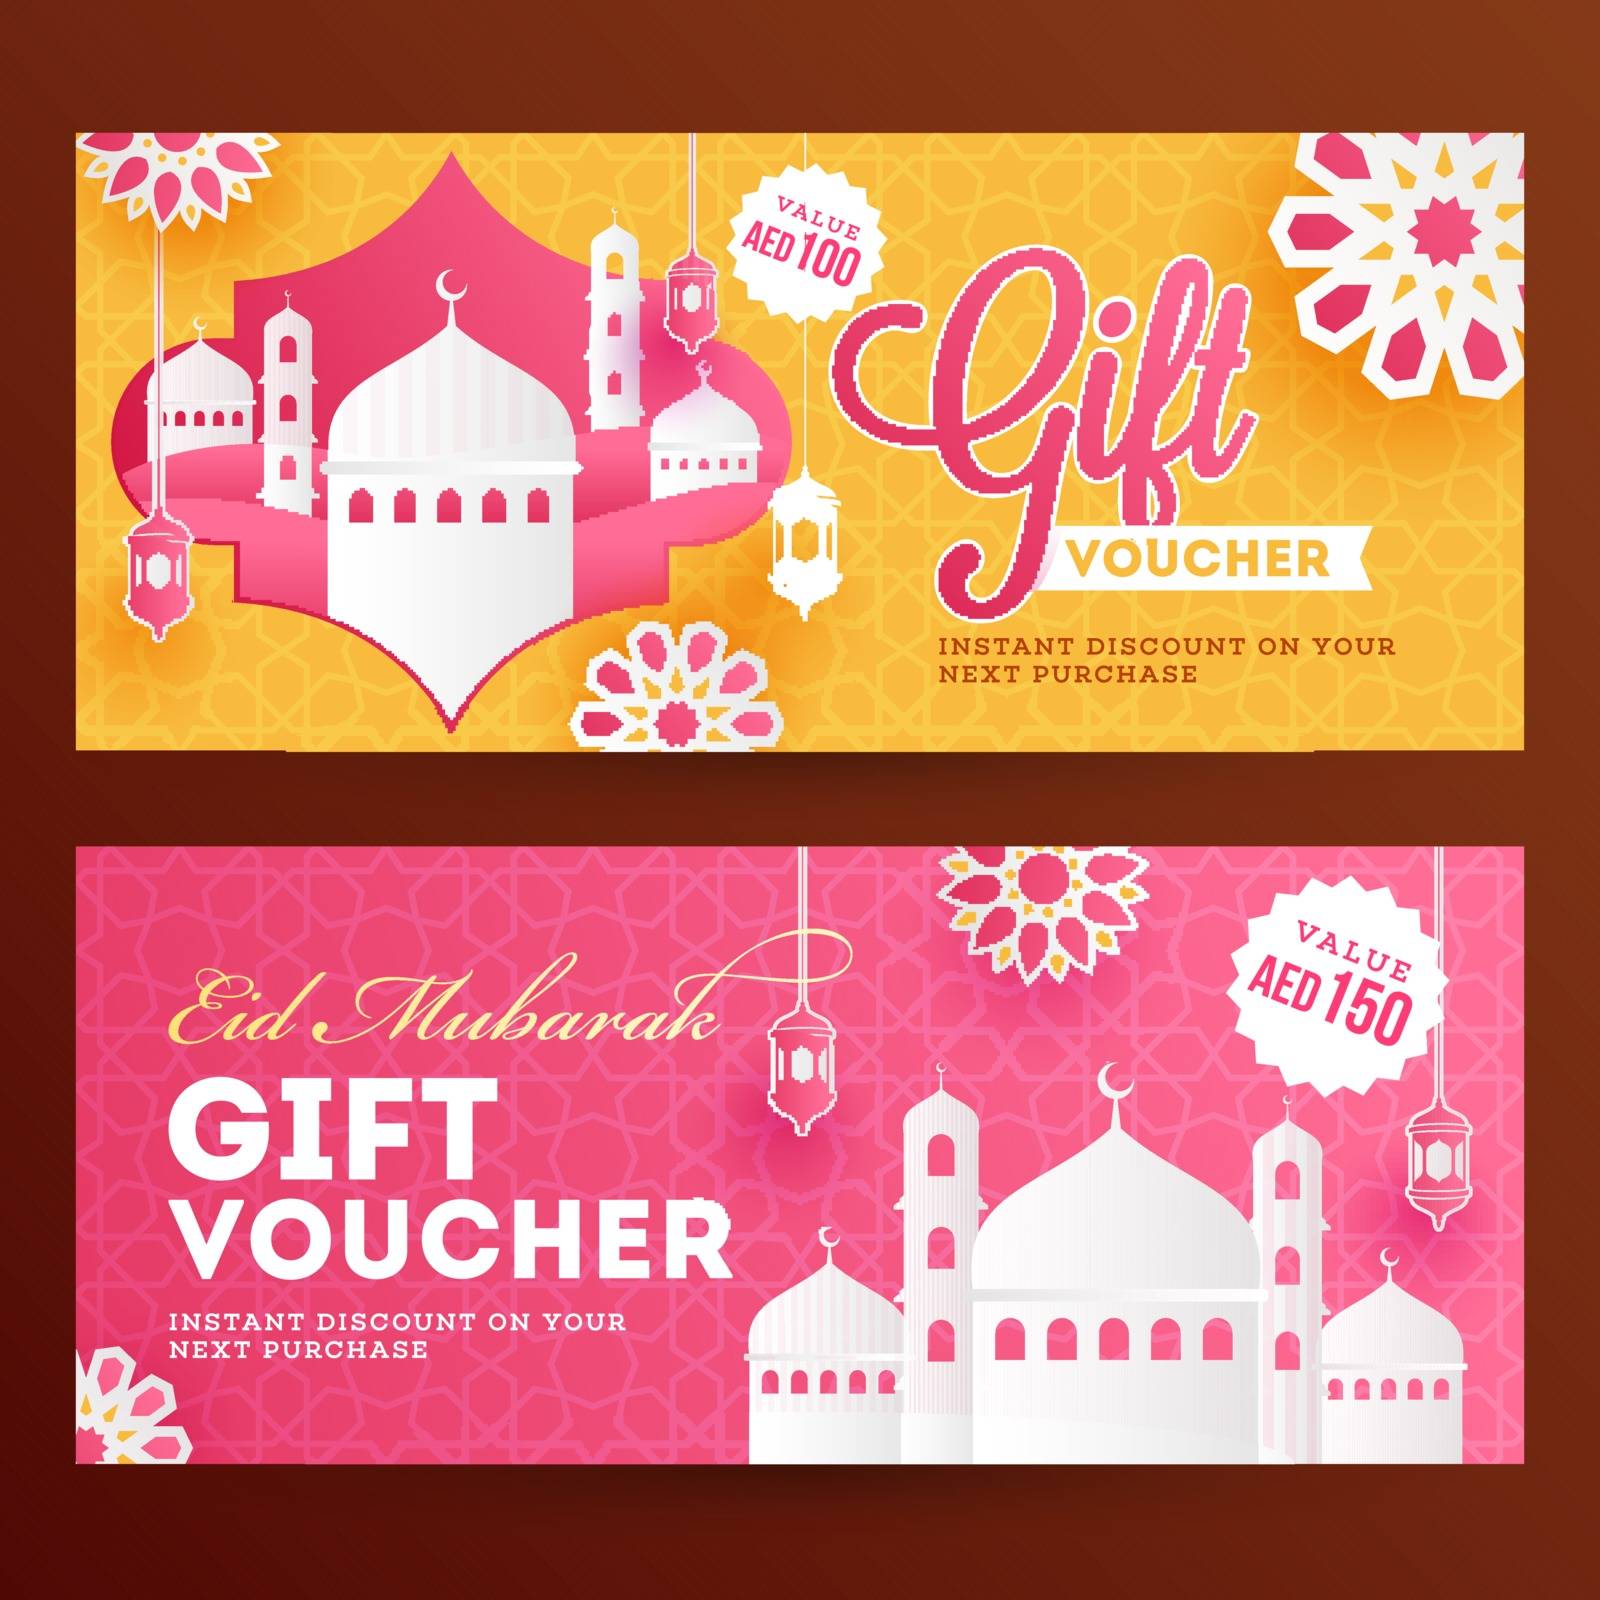 Eid Mubarak gift coupon or voucher front and back design in two different color.